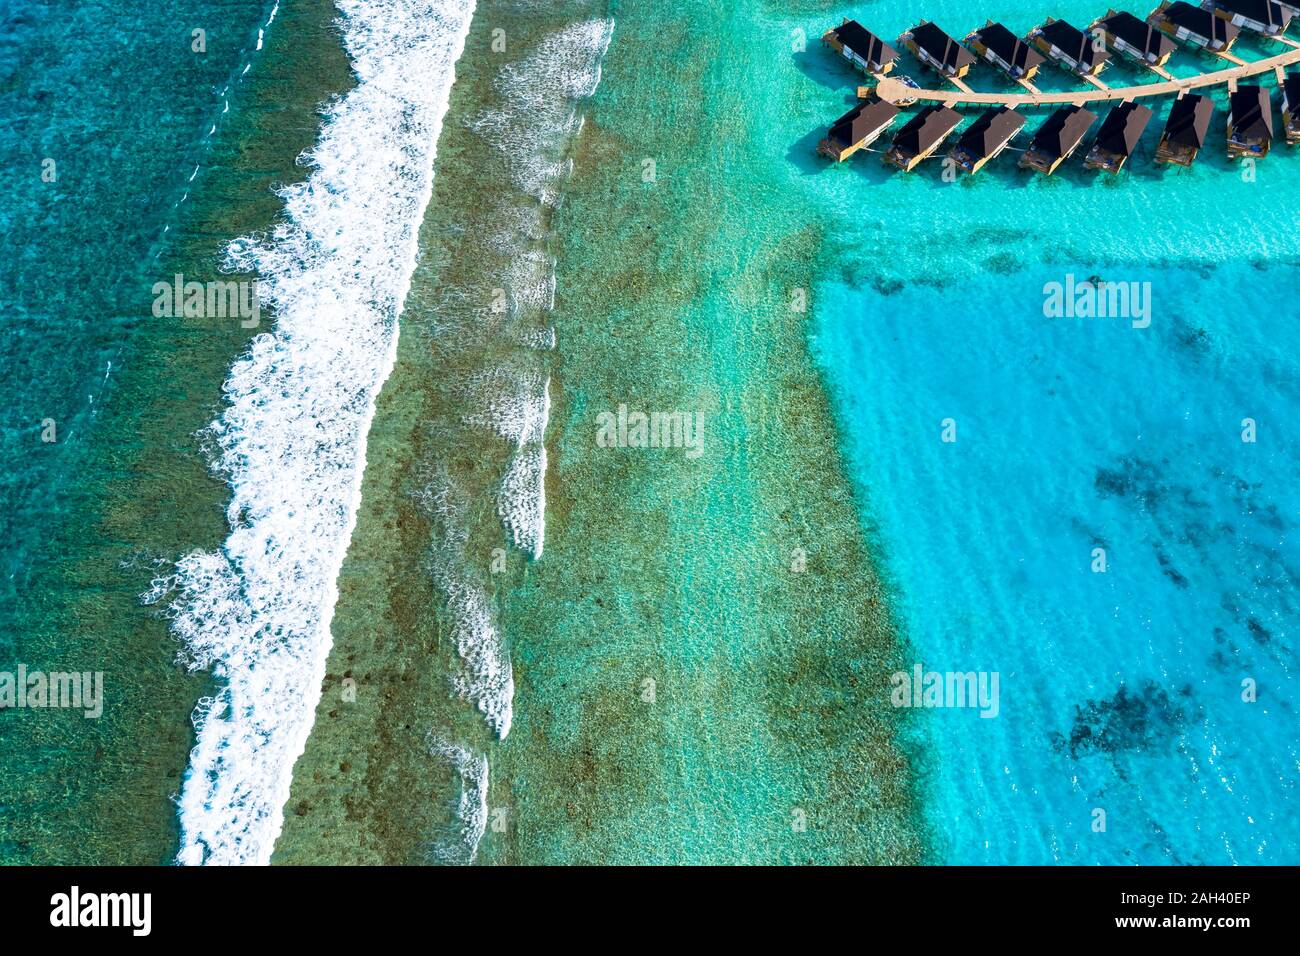 Maldives, South Male Atoll, Aerial view of coral reef Stock Photo